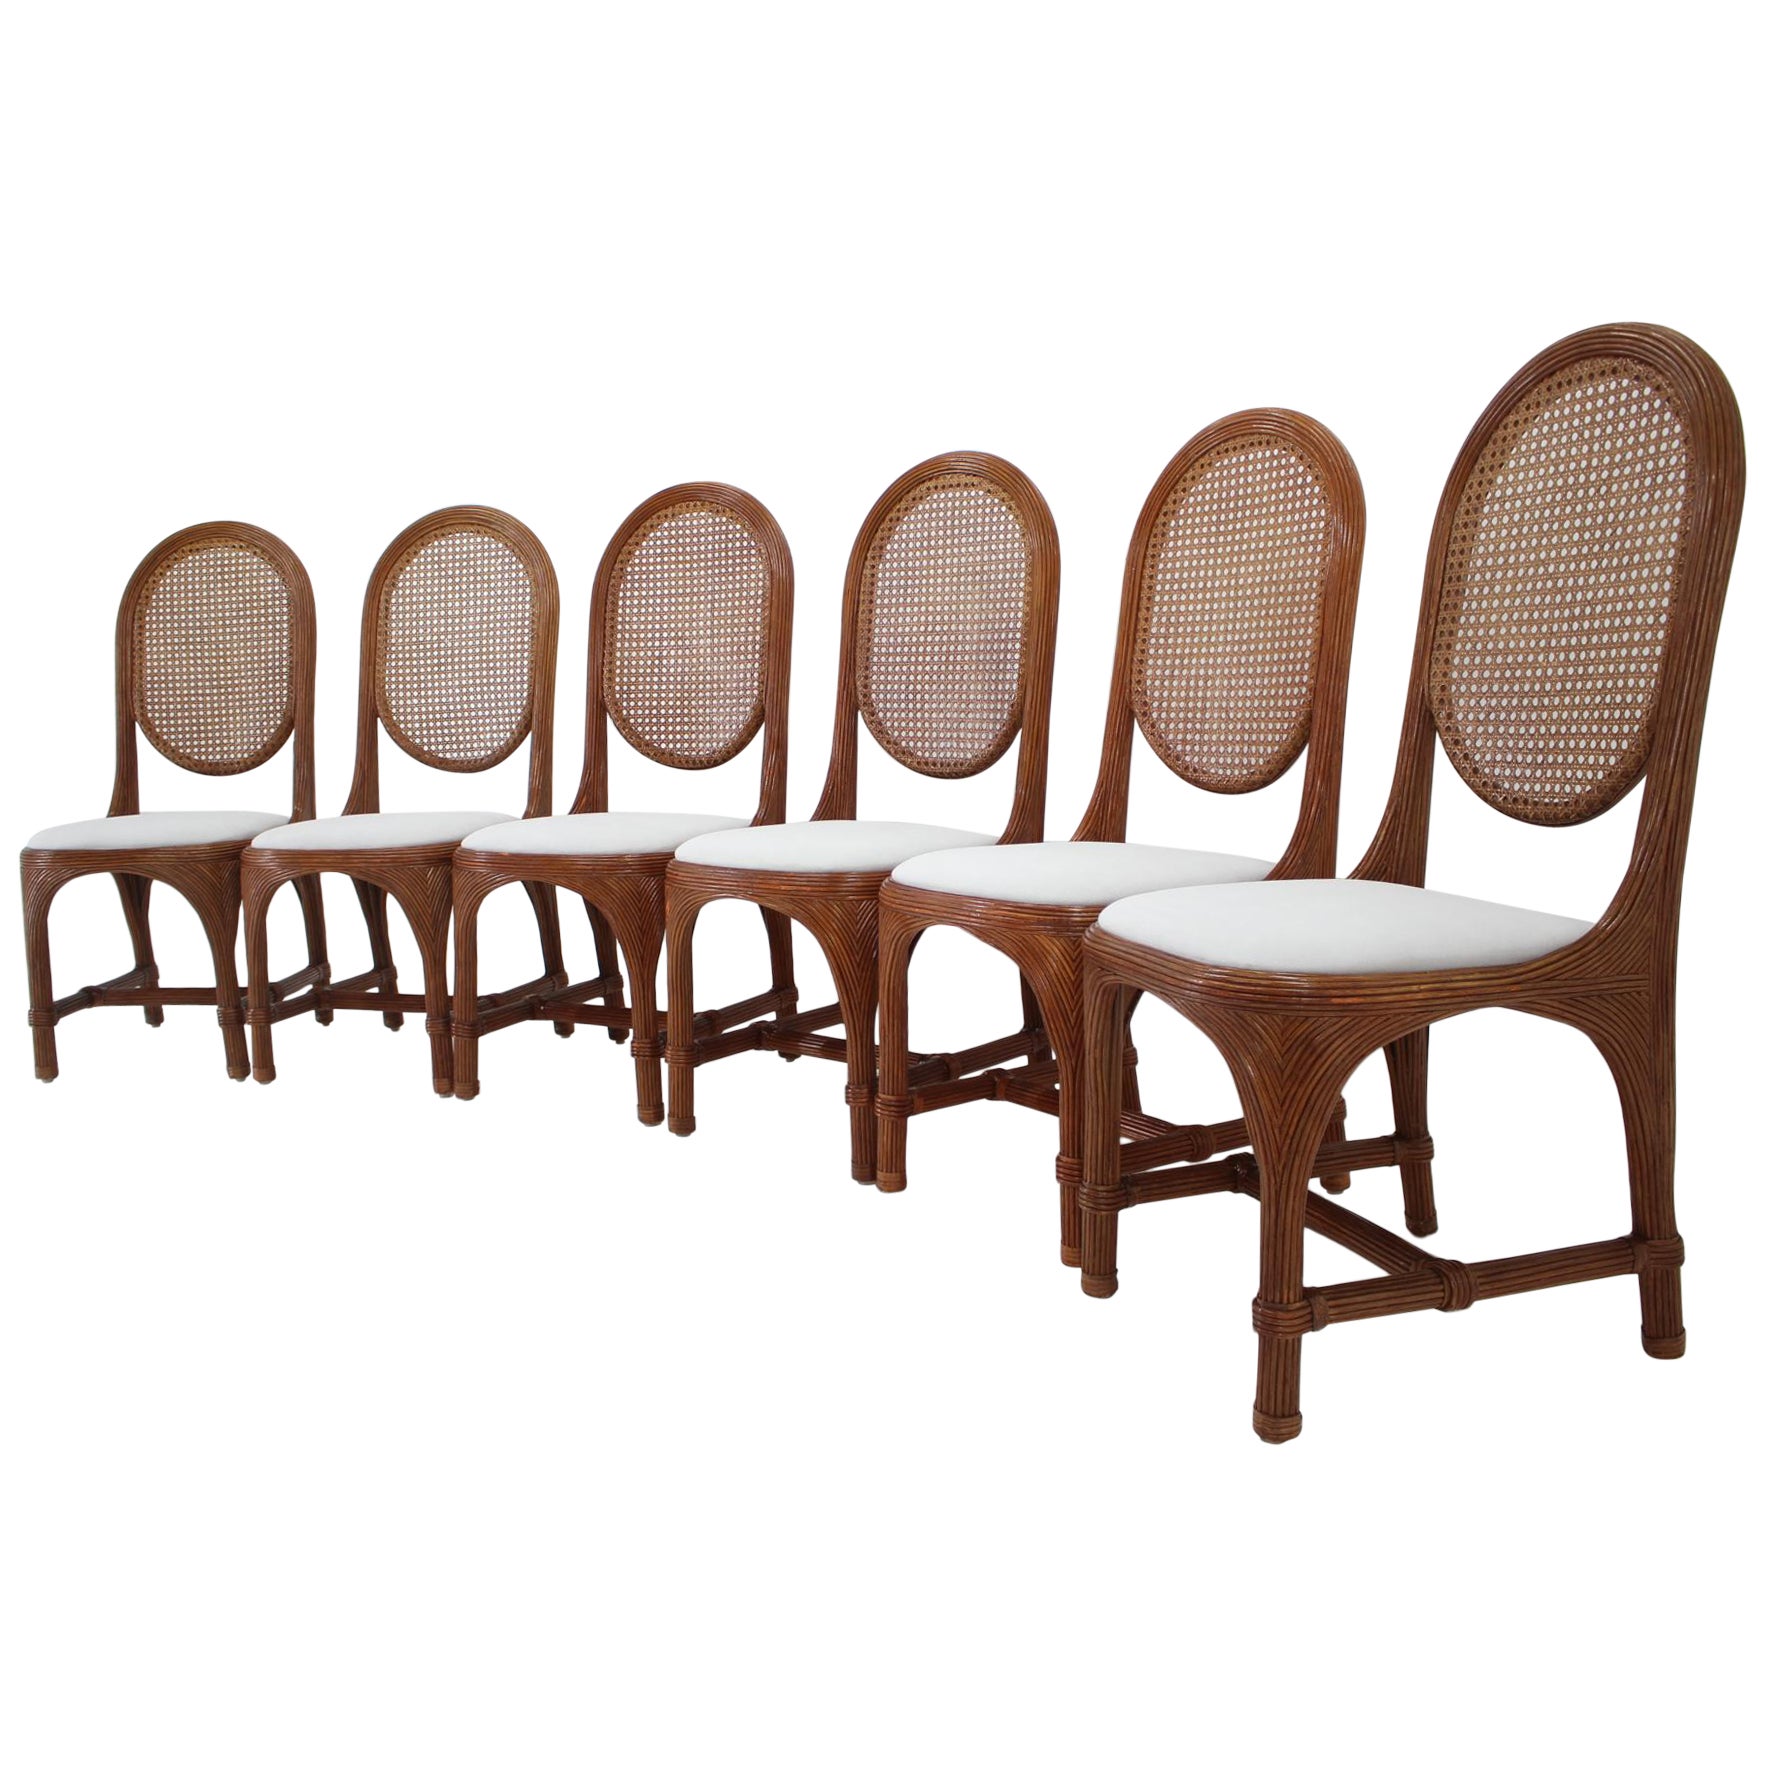 Set of 6 Antique Rattan Dining Chairs with Cane Backrest  For Sale